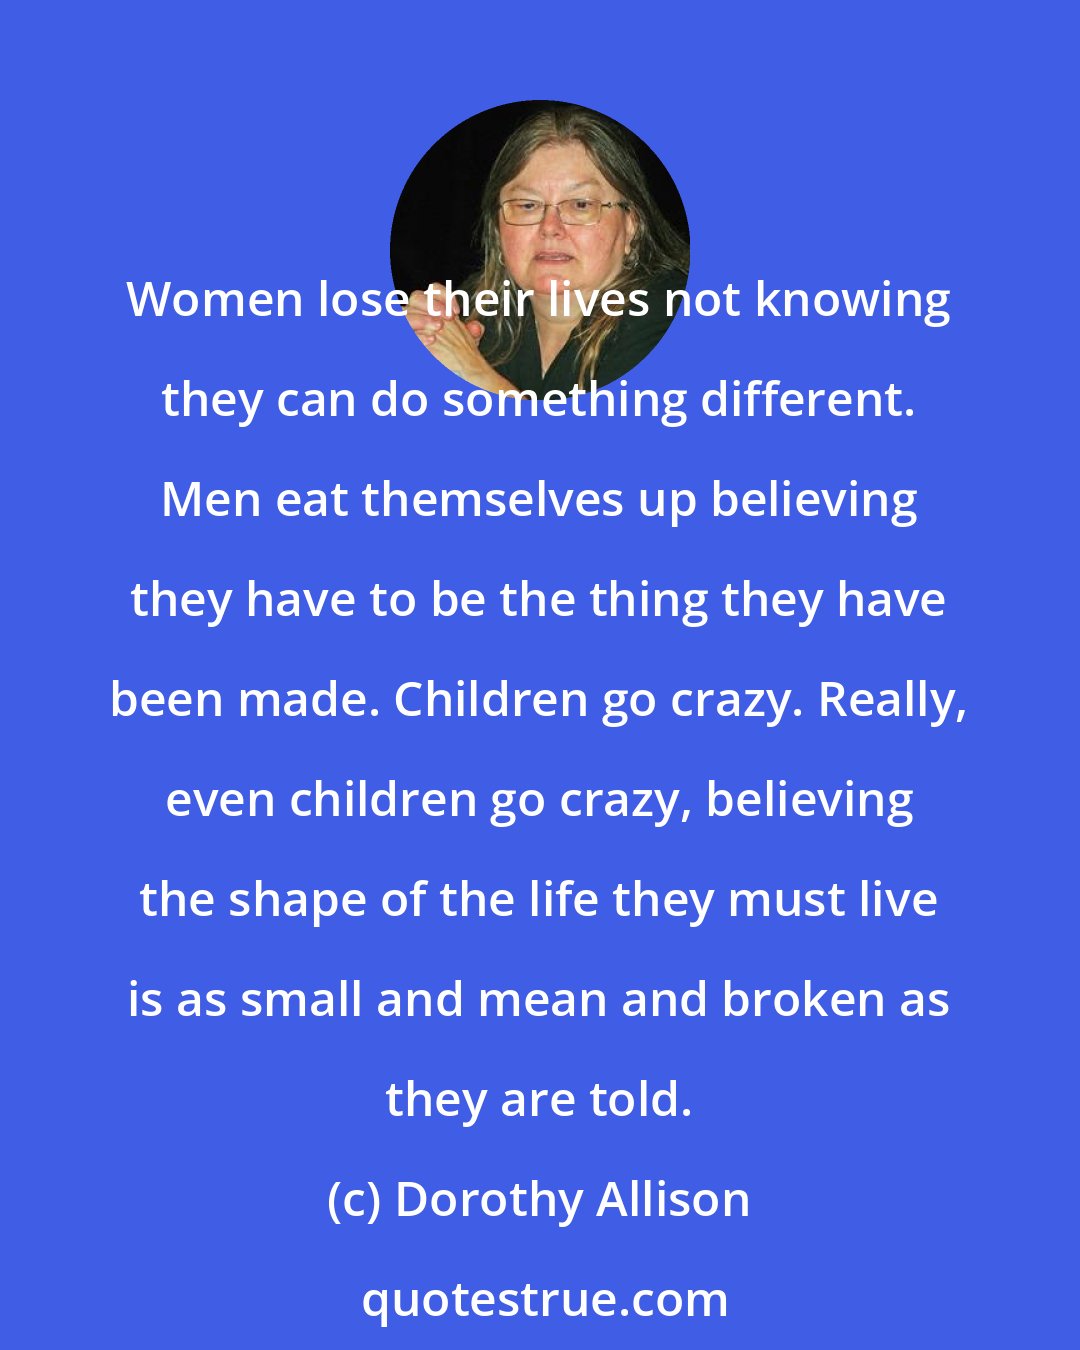 Dorothy Allison: Women lose their lives not knowing they can do something different. Men eat themselves up believing they have to be the thing they have been made. Children go crazy. Really, even children go crazy, believing the shape of the life they must live is as small and mean and broken as they are told.